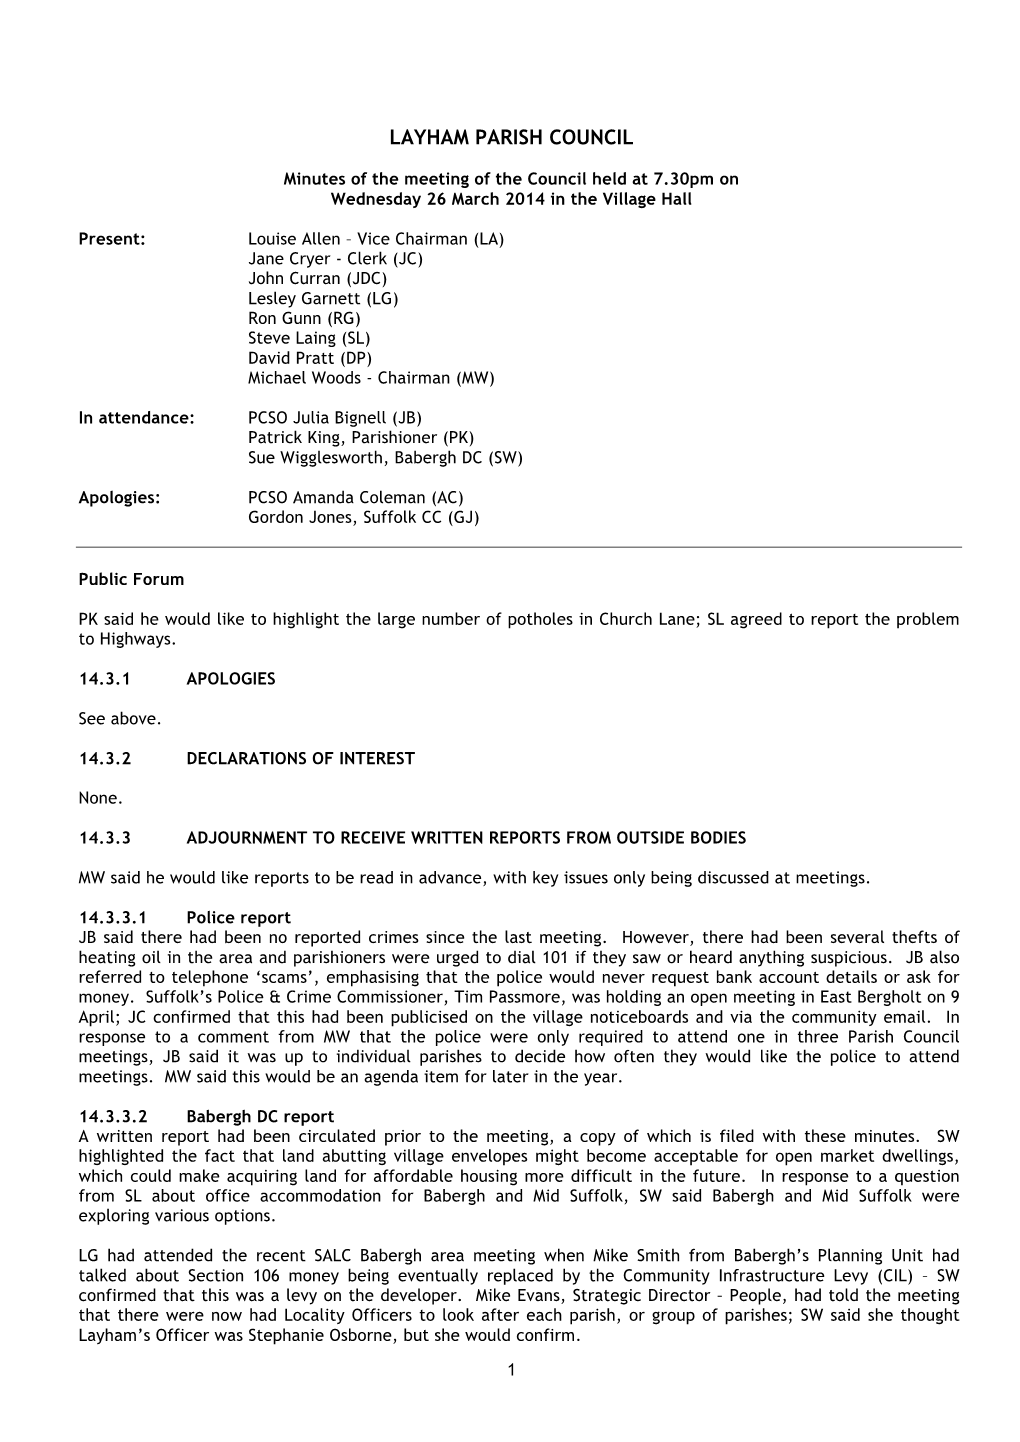 Minutes of Layham Parish Council Meeting on 26 March 2014